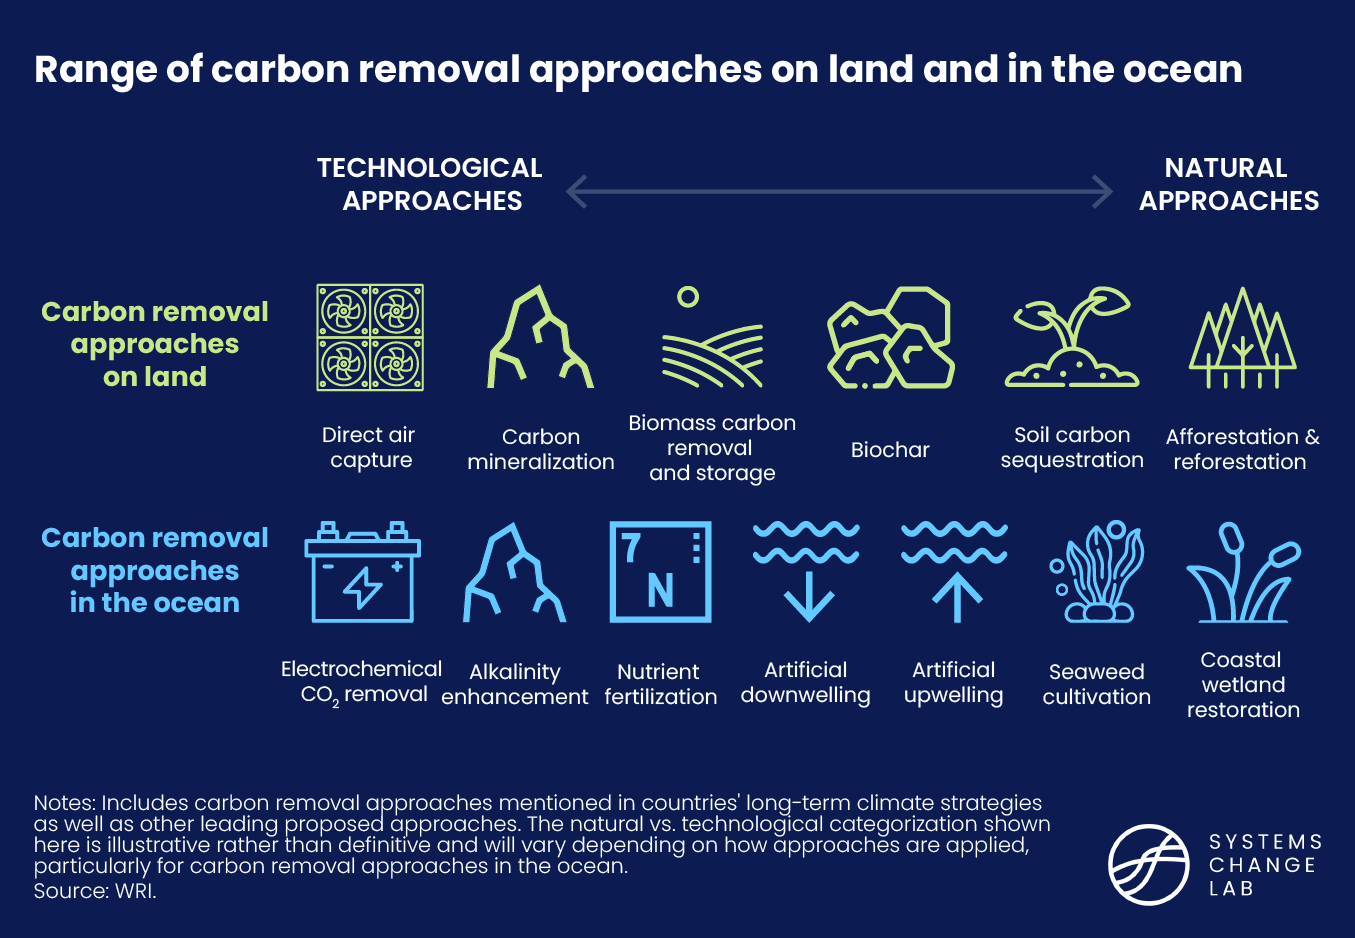 Range of carbon removal approaches on land and in the ocean graphic